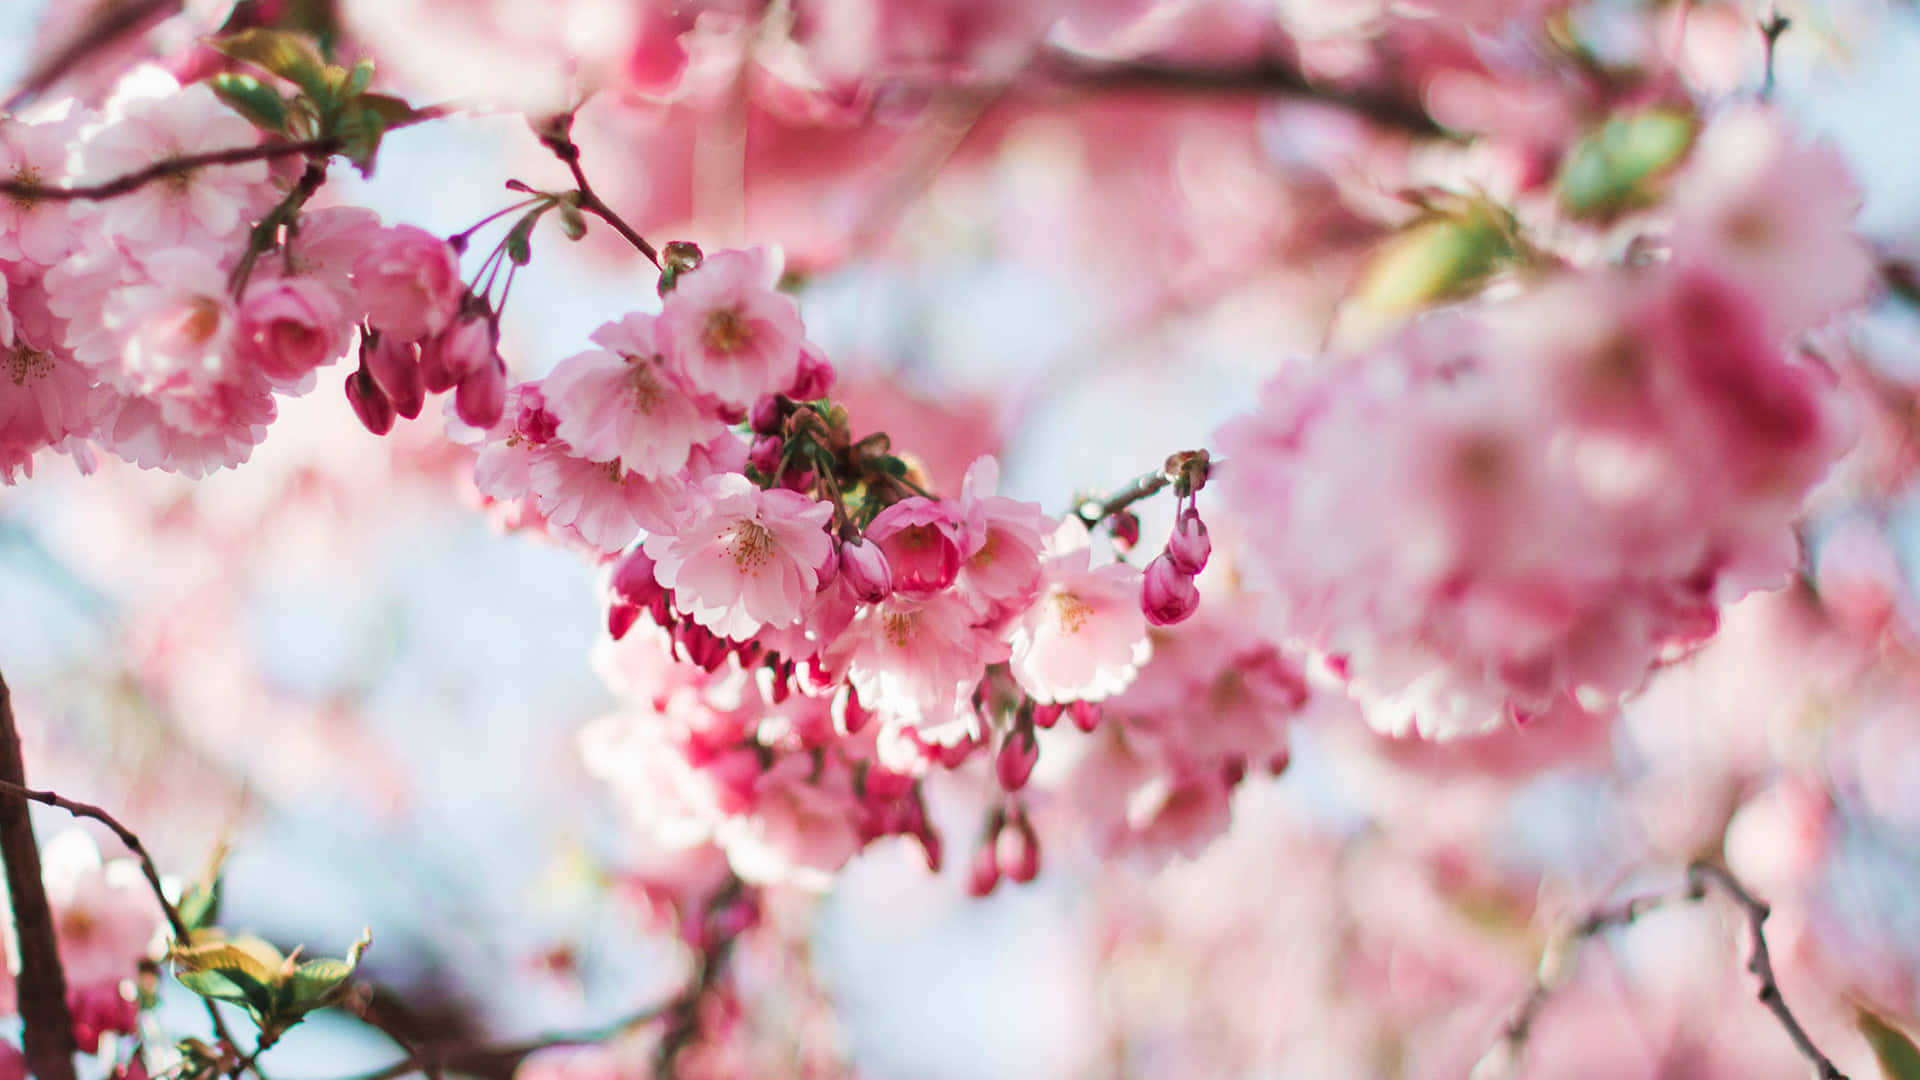 A delicate pink cherry blossom branch in bloom Wallpaper